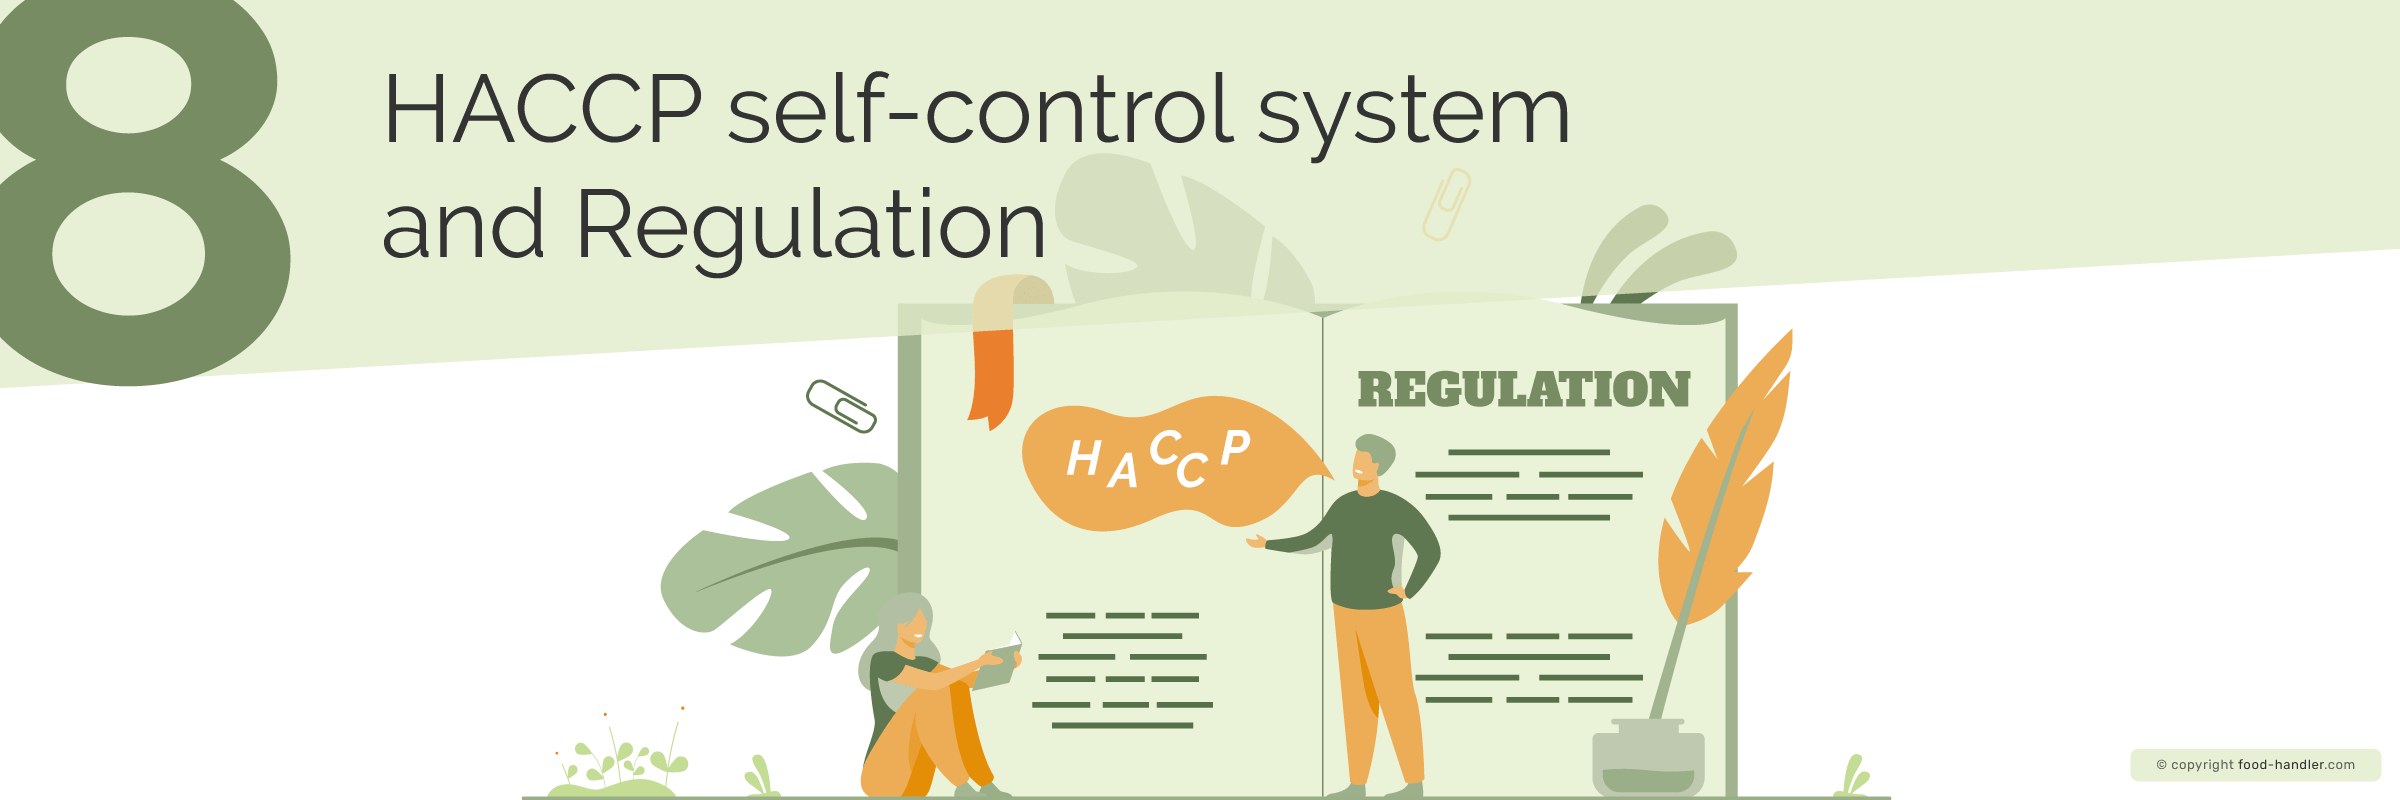 HACCP self-control system and Regulation